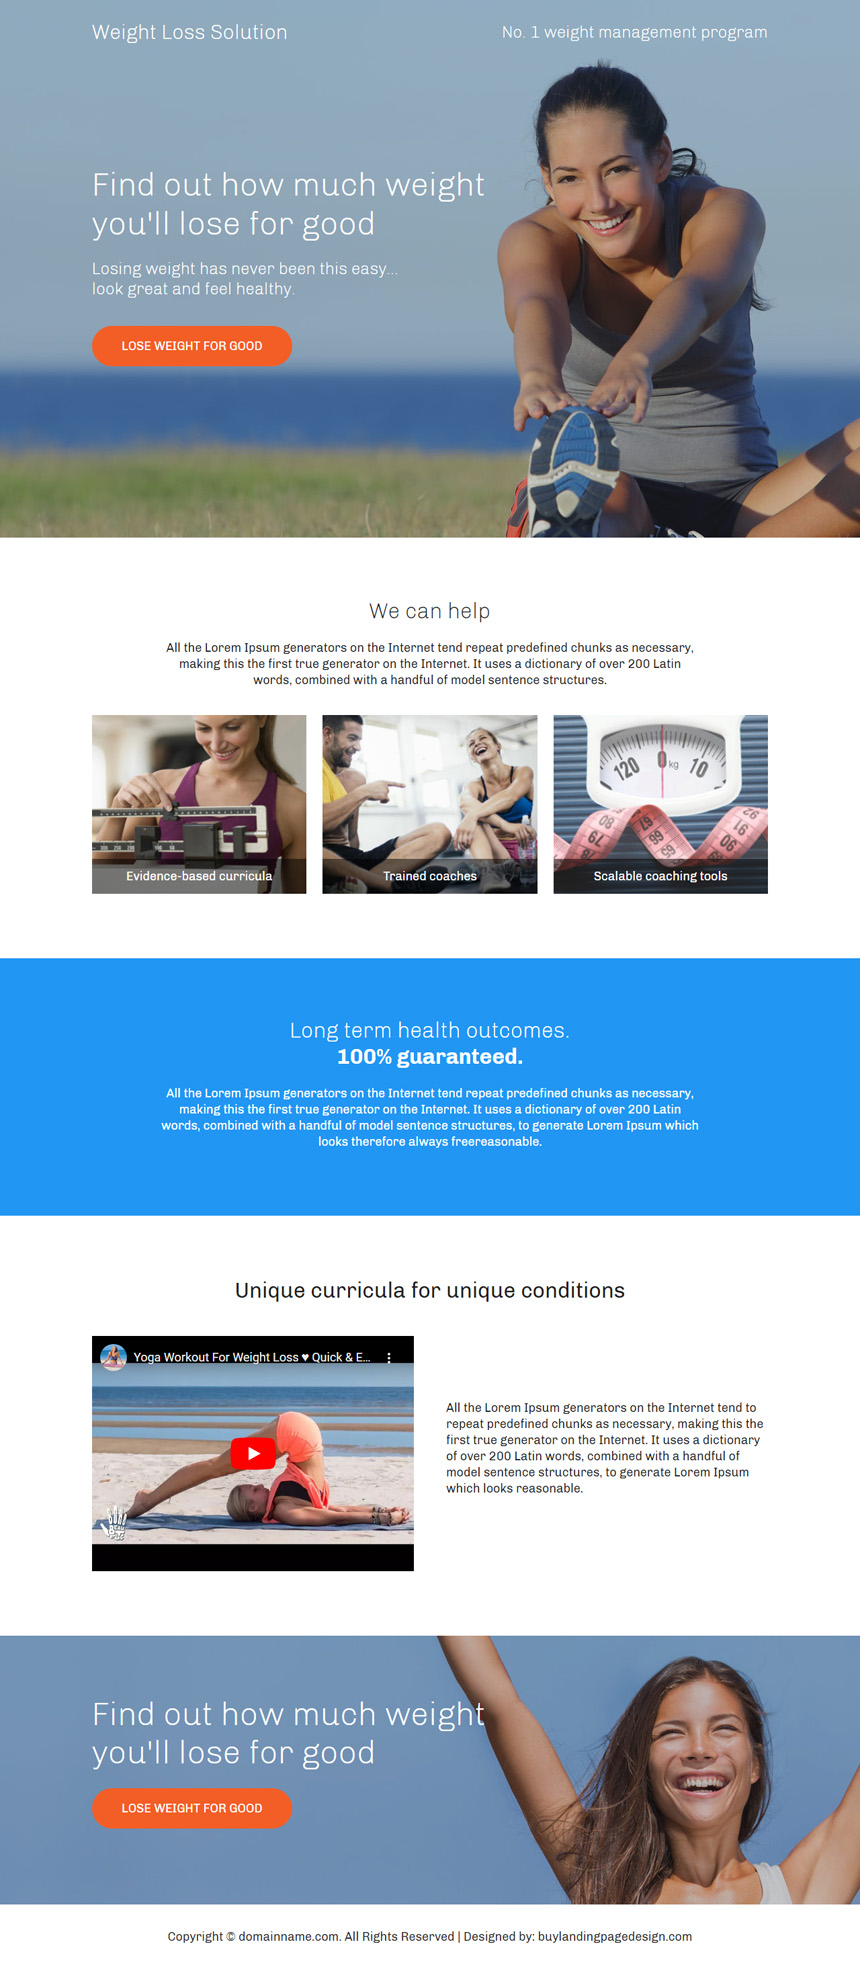 weight loss solution lead capture landing page